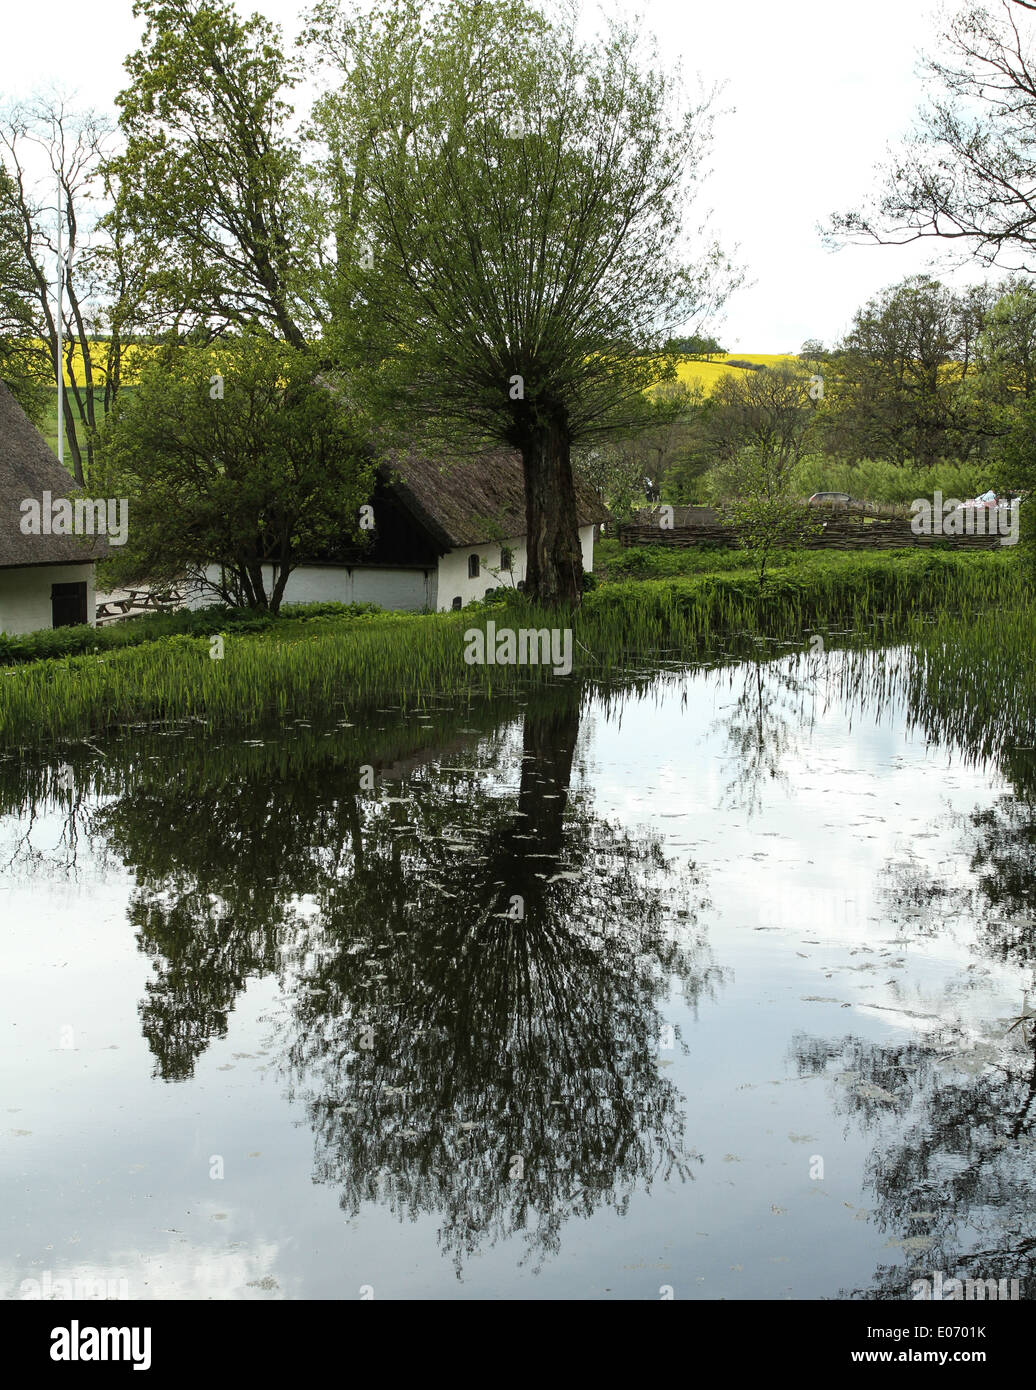 Old farm house with tree reflected in pond Stock Photo